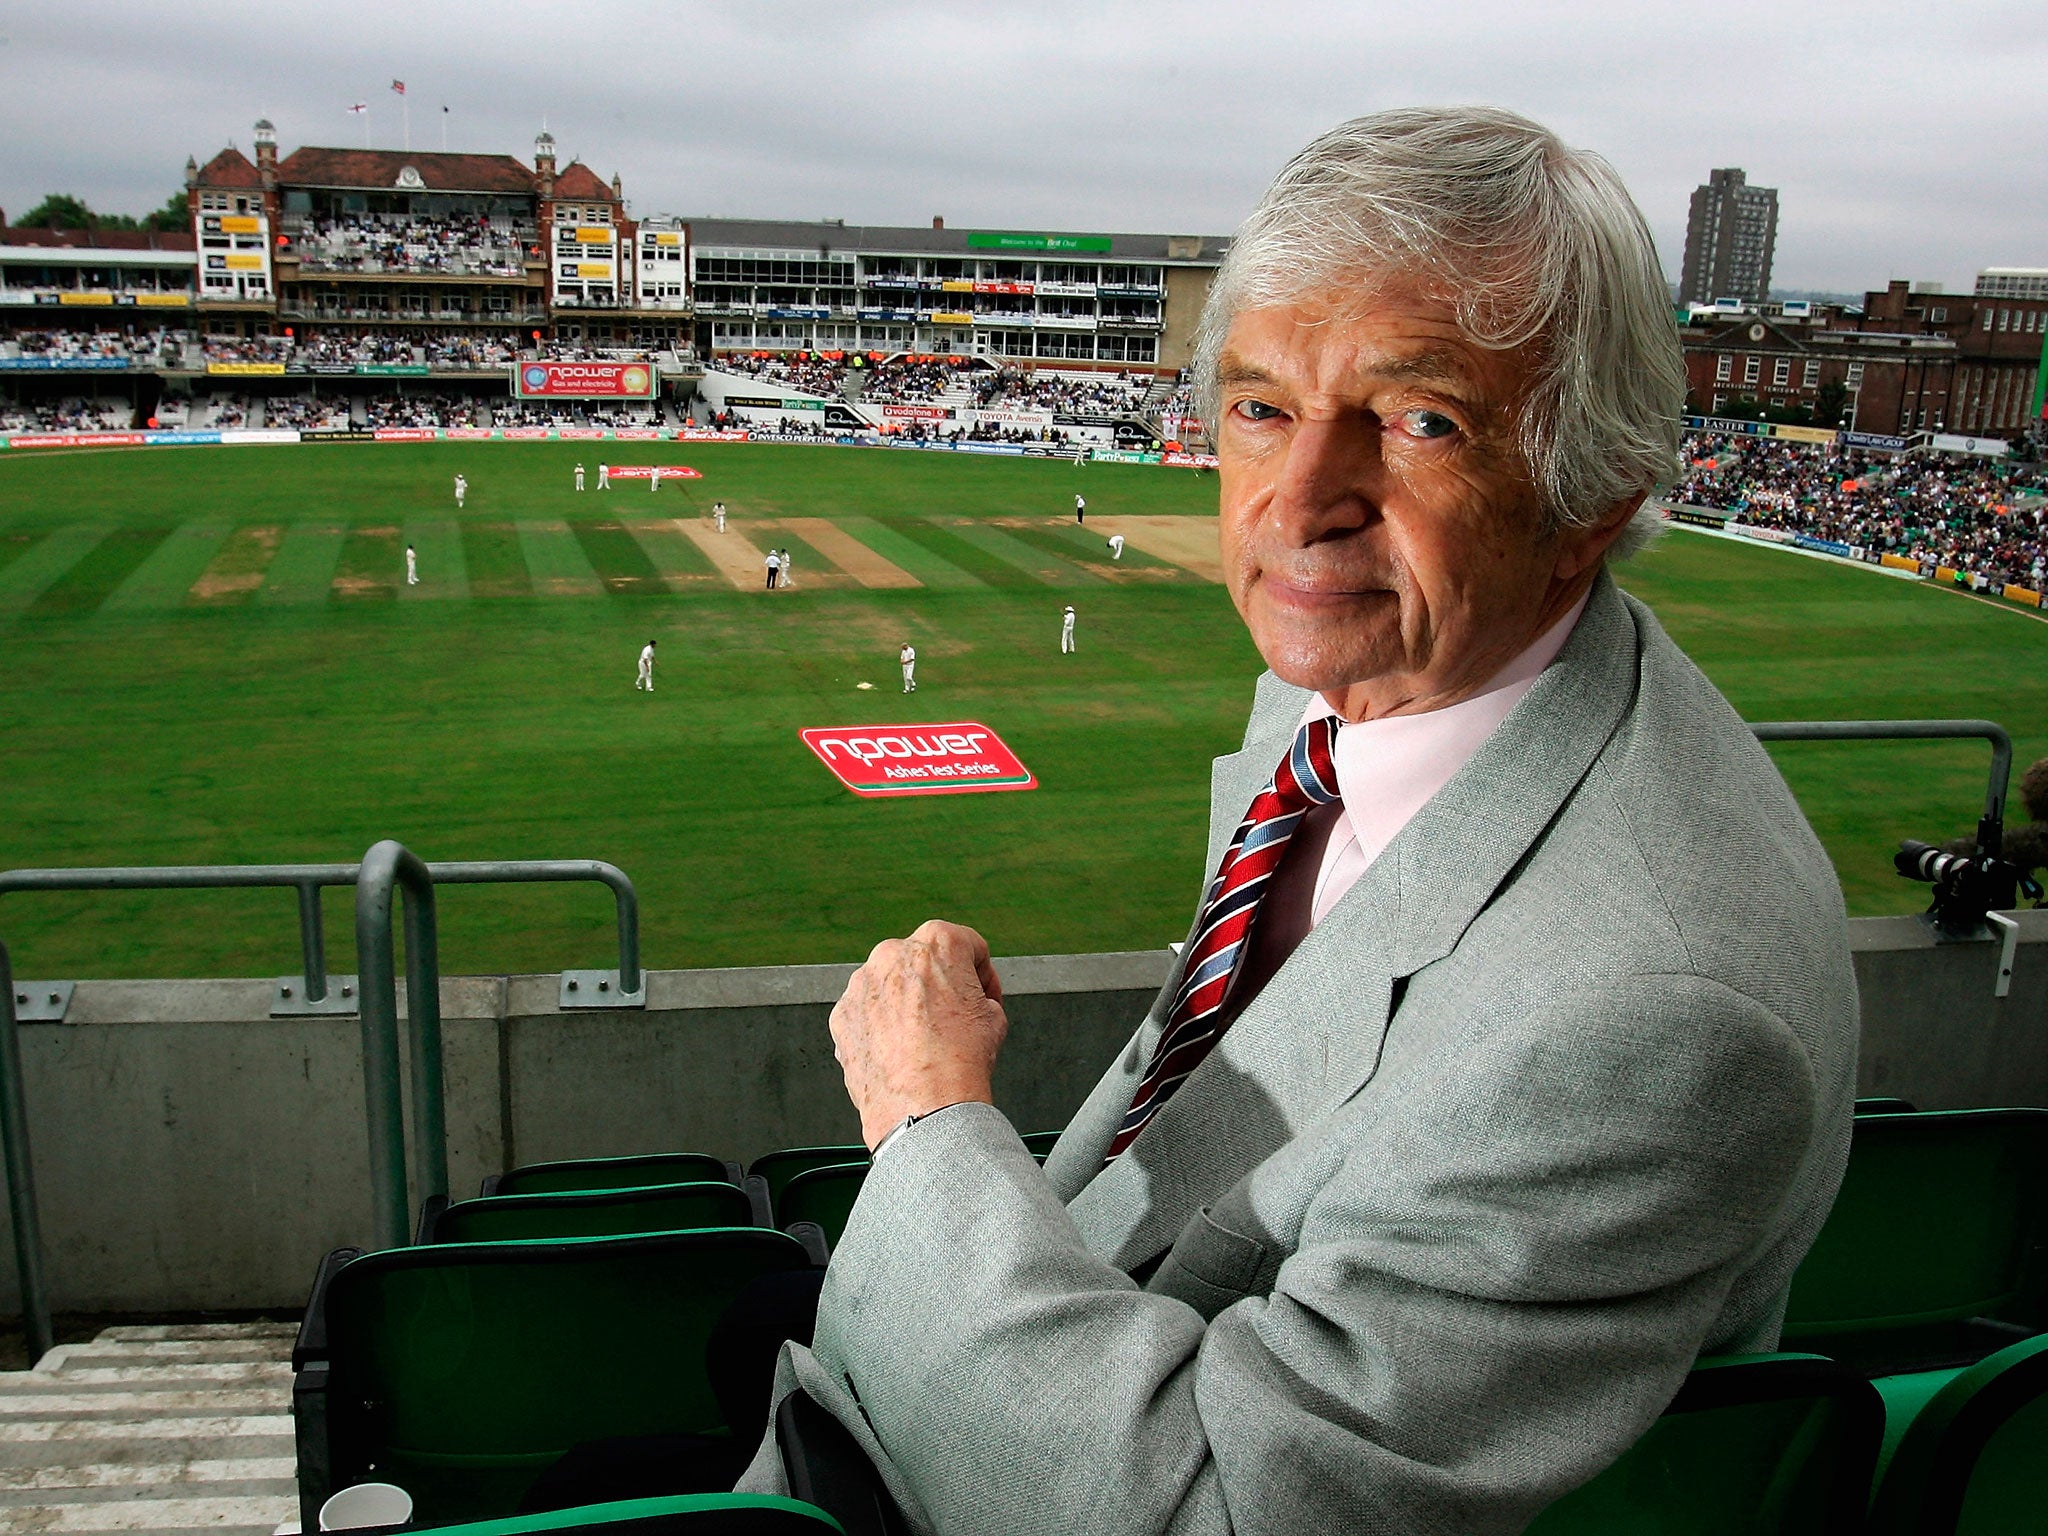 Richie Benaud died, aged 84, on Friday